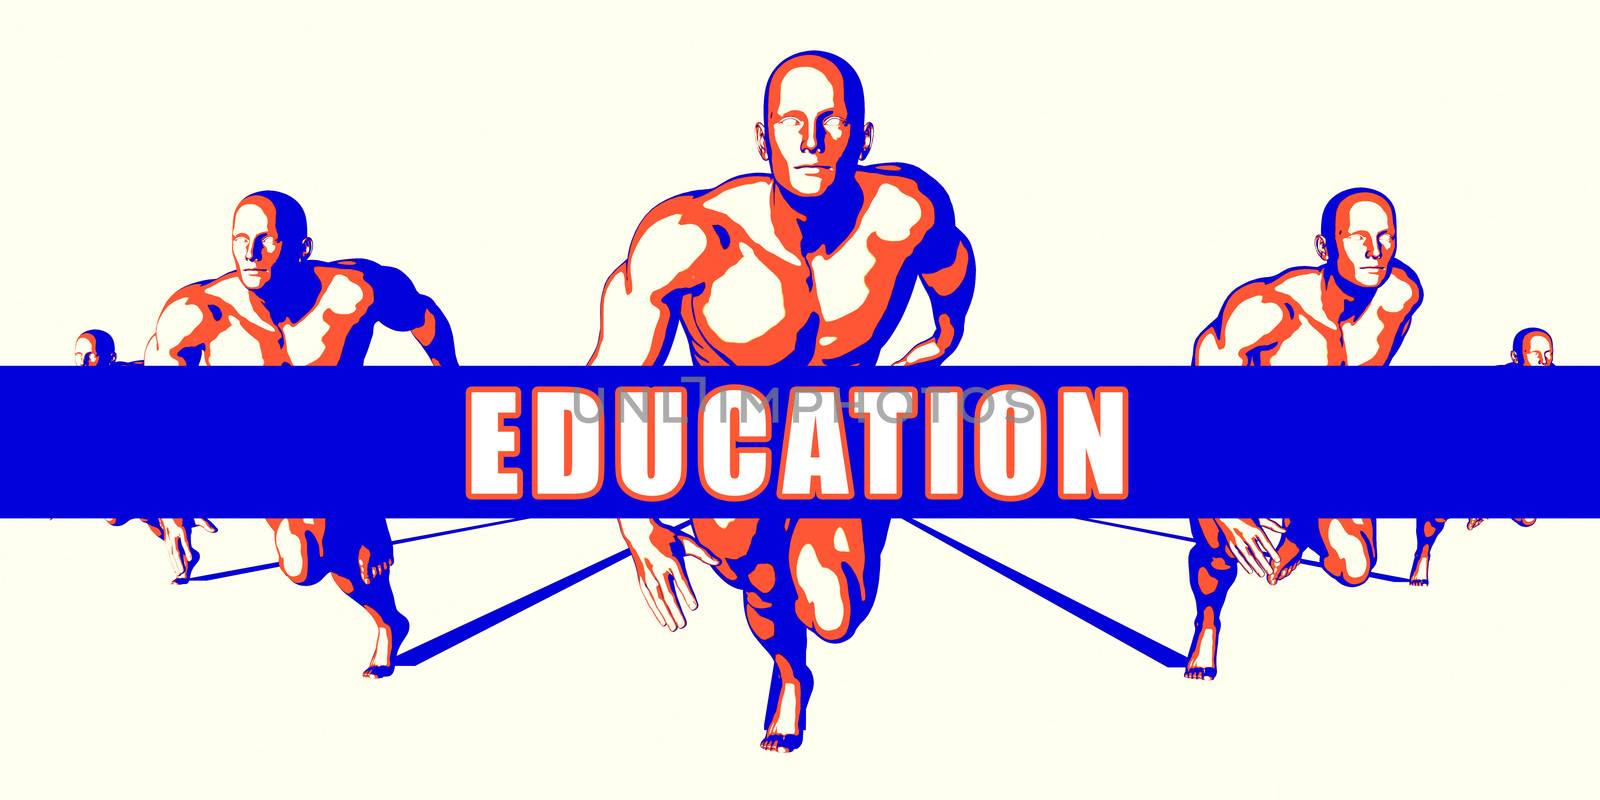 Education as a Competition Concept Illustration Art